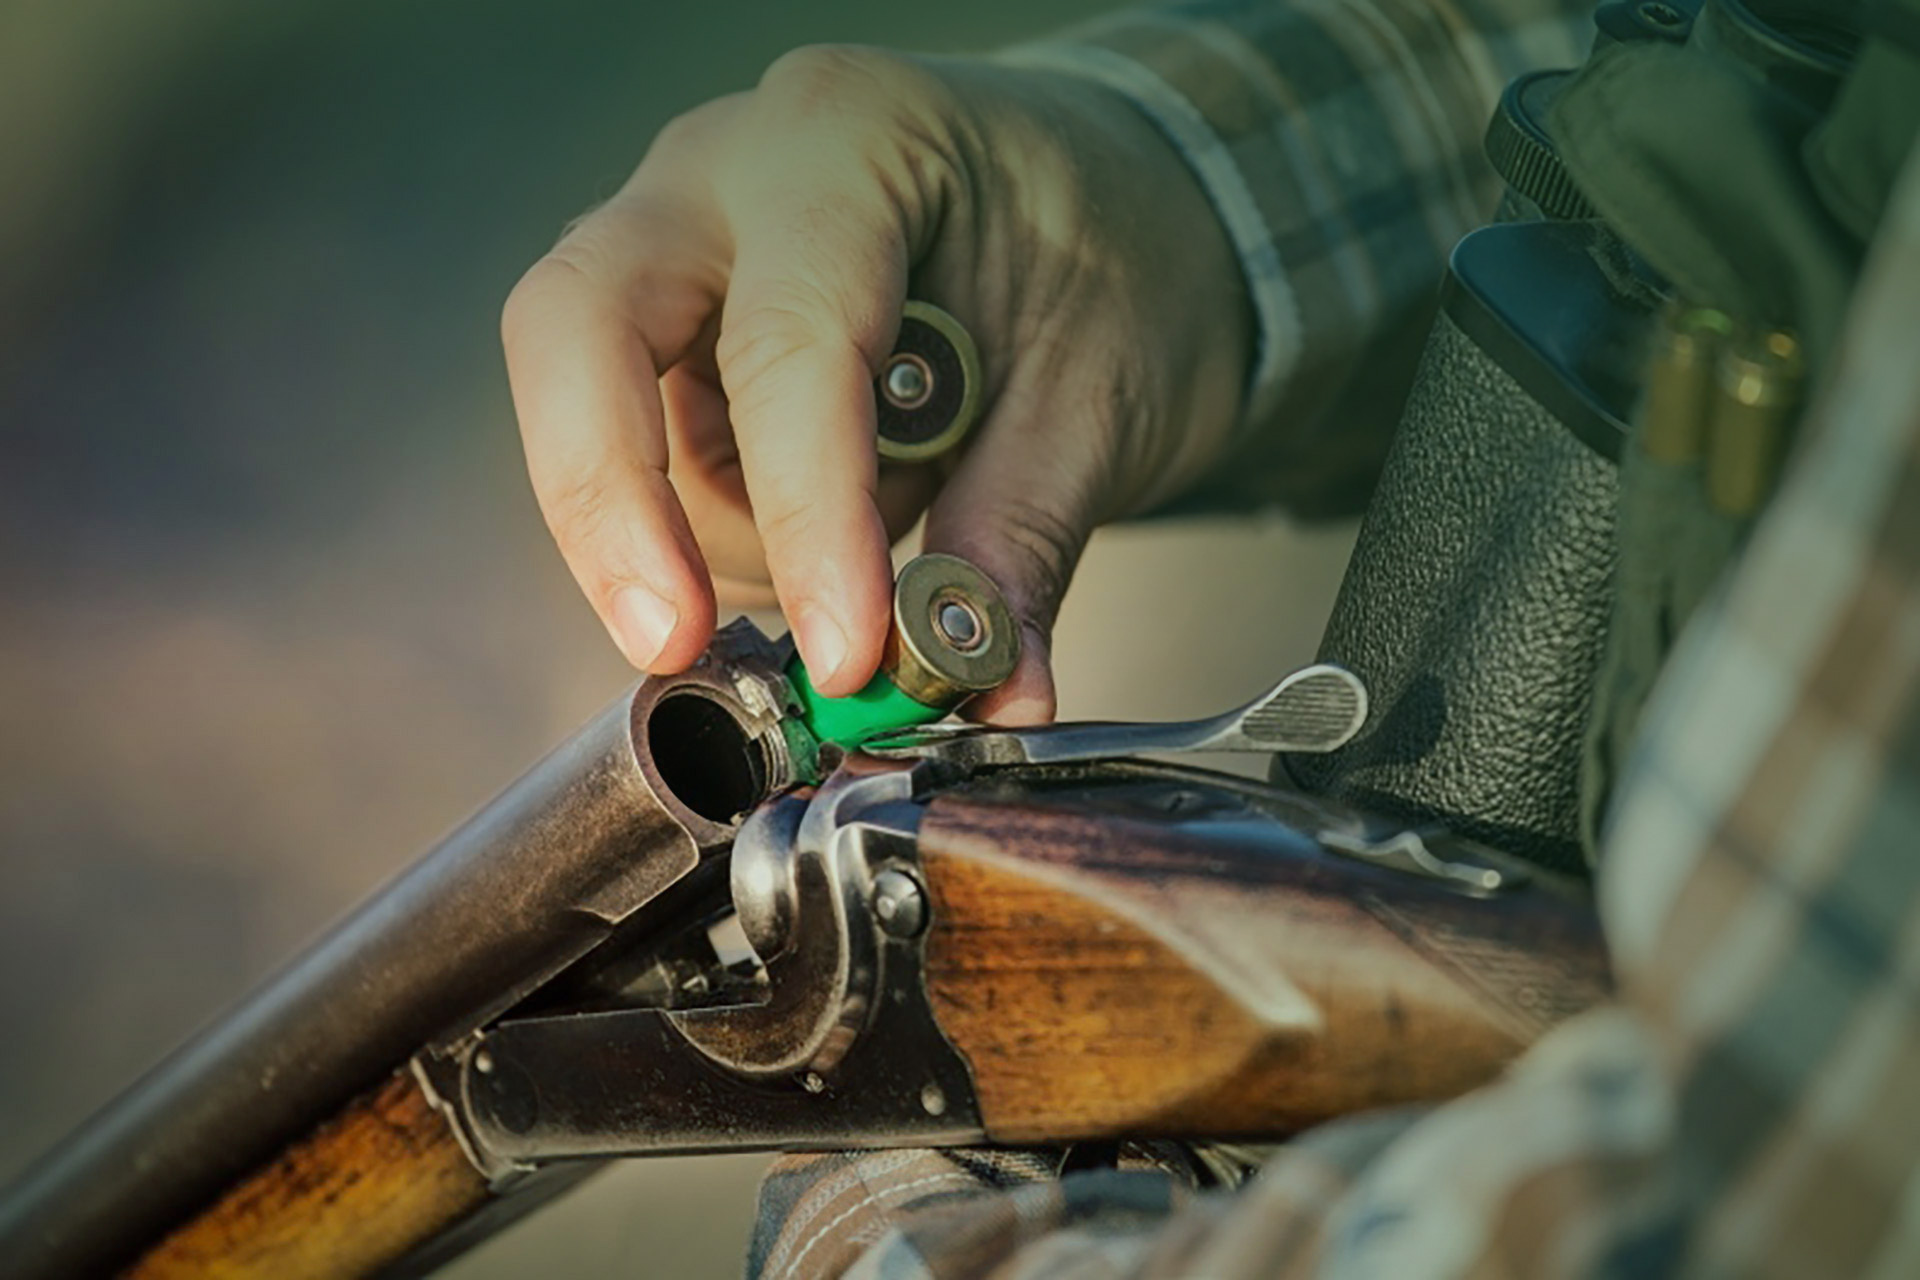 GUIDANCE ON MANAGING RISKS FROM LEAD AMMUNITION